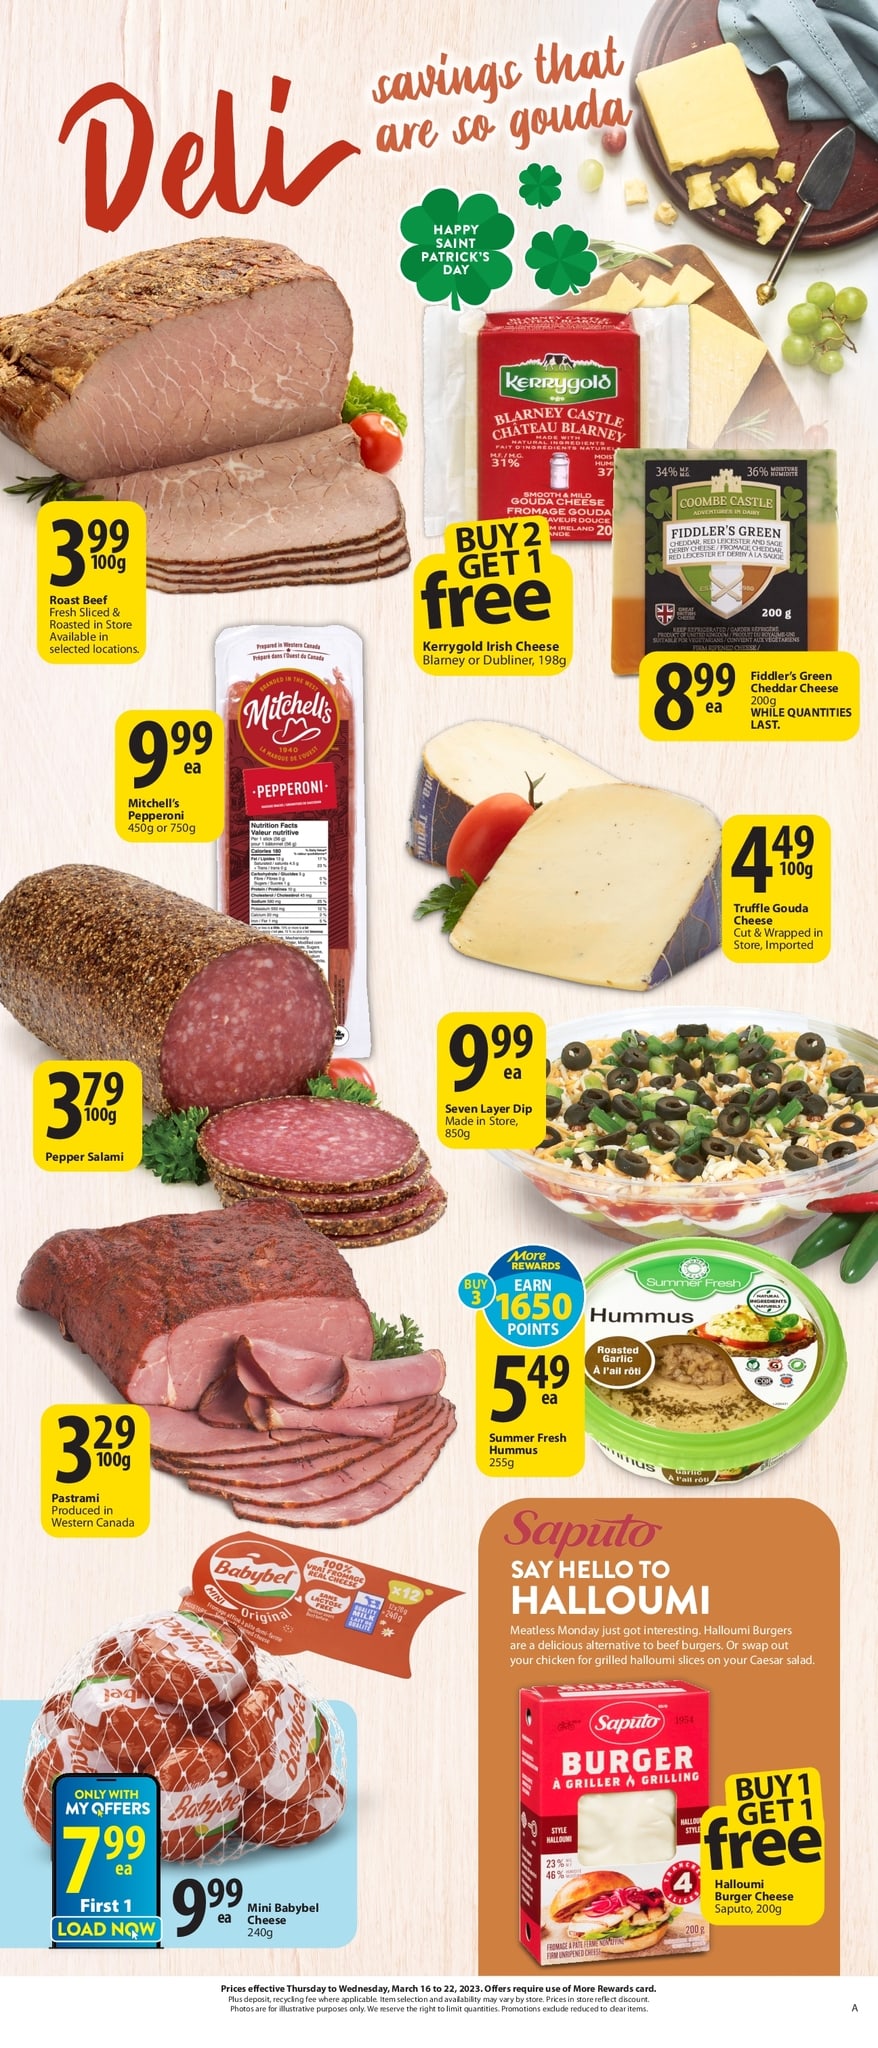 Save-On-Foods - Weekly Flyer Specials - Page 8